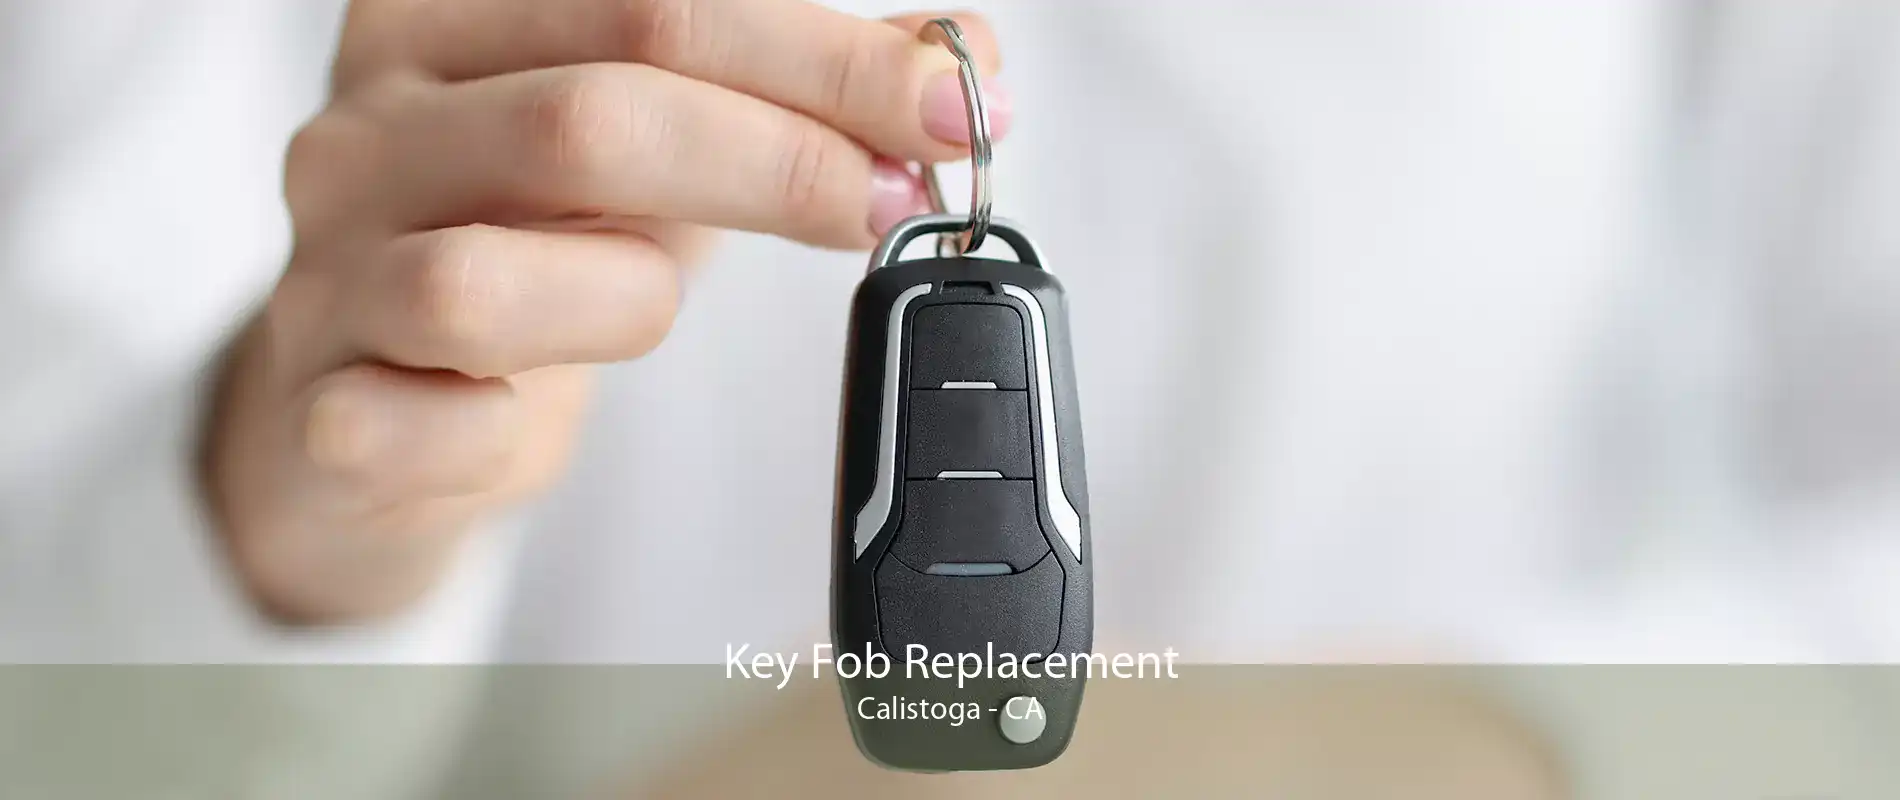 Key Fob Replacement Calistoga - CA